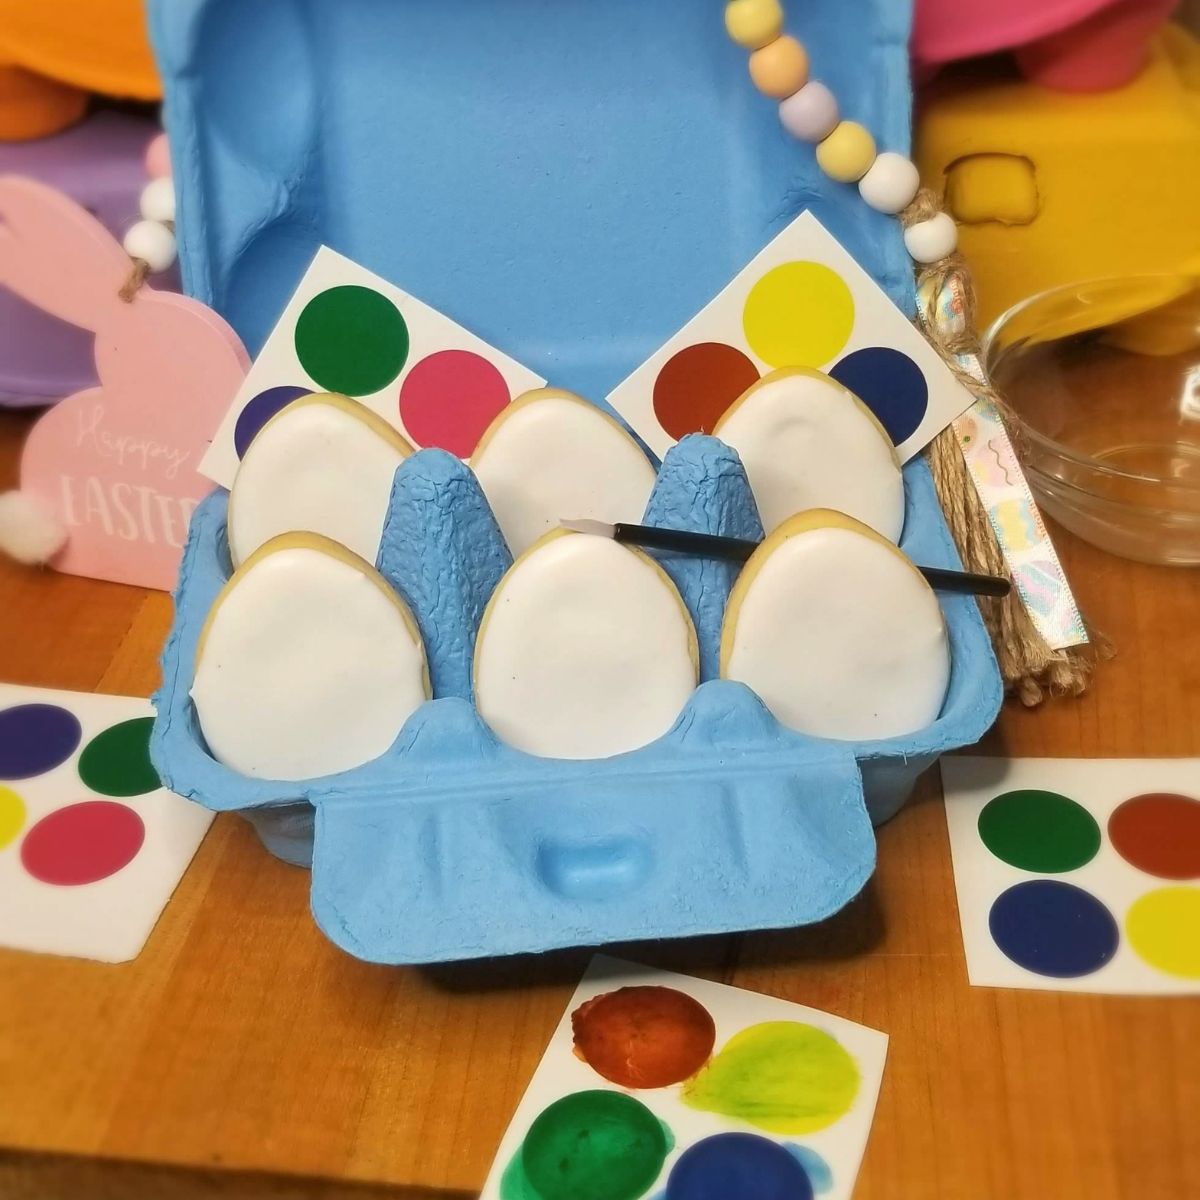 Paint Your Own Cookie Kits